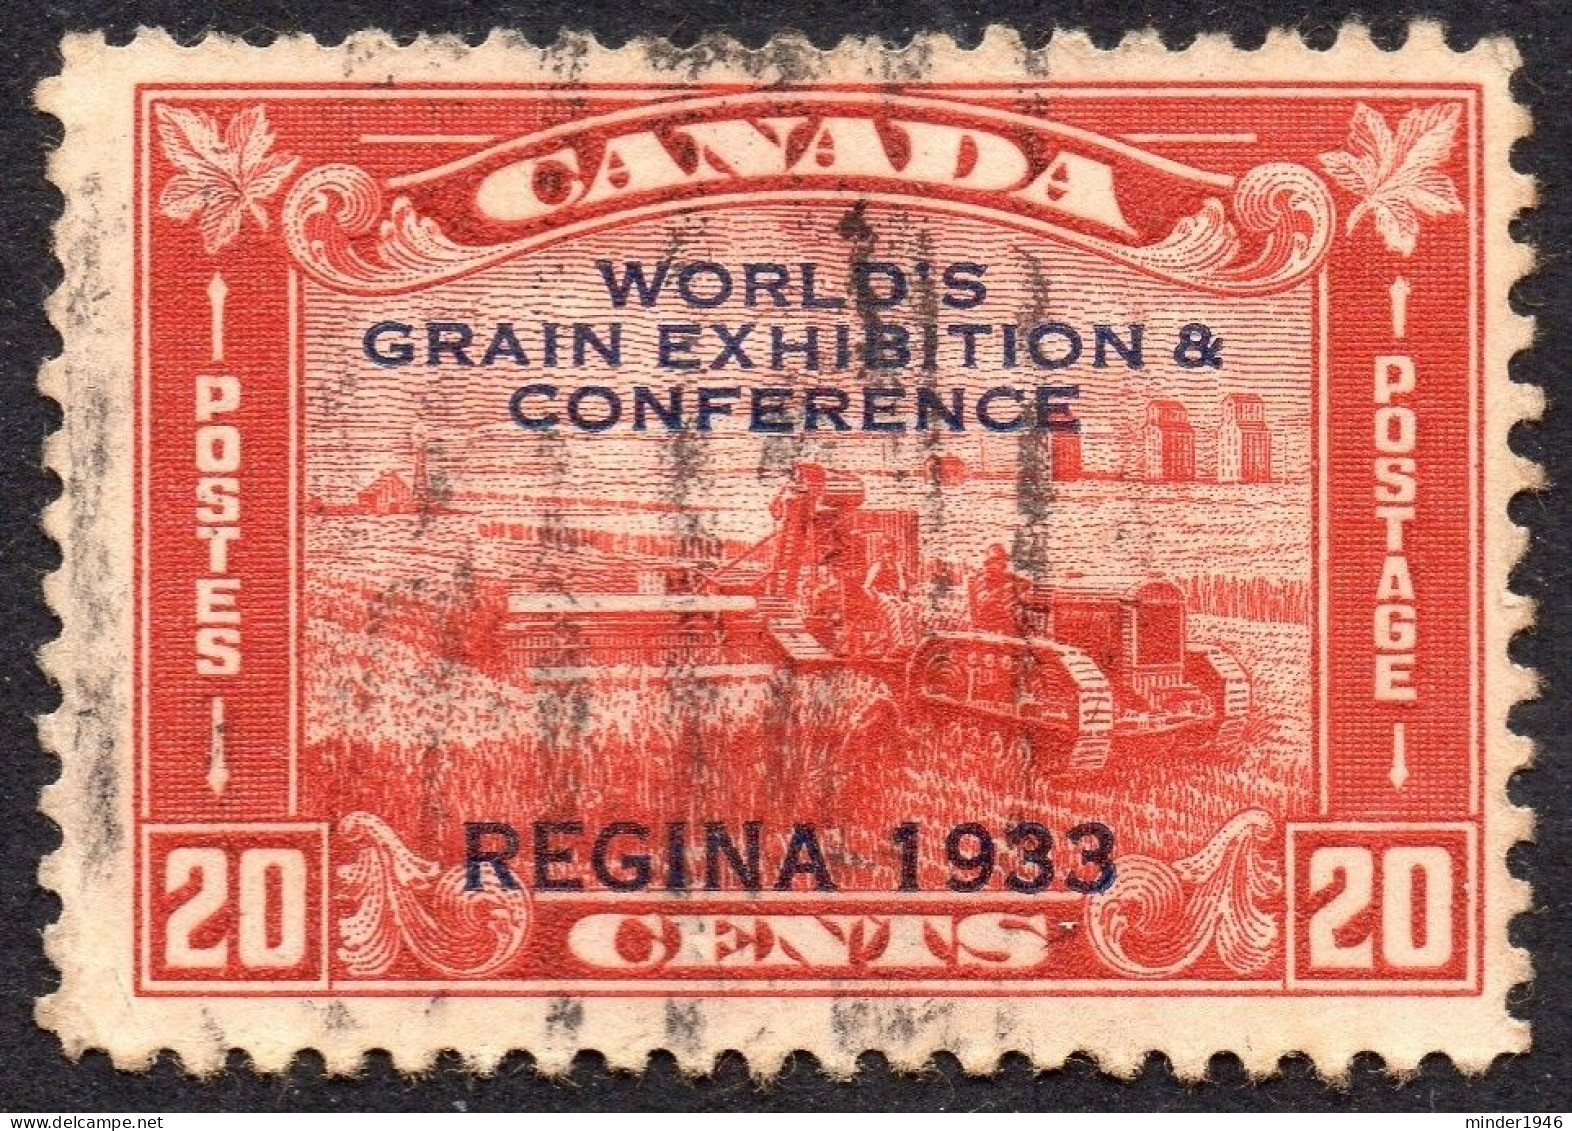 CANADA 1933 KGV 20c Red, World Grain Exhibition & Conference Regina SG330 Used - Used Stamps